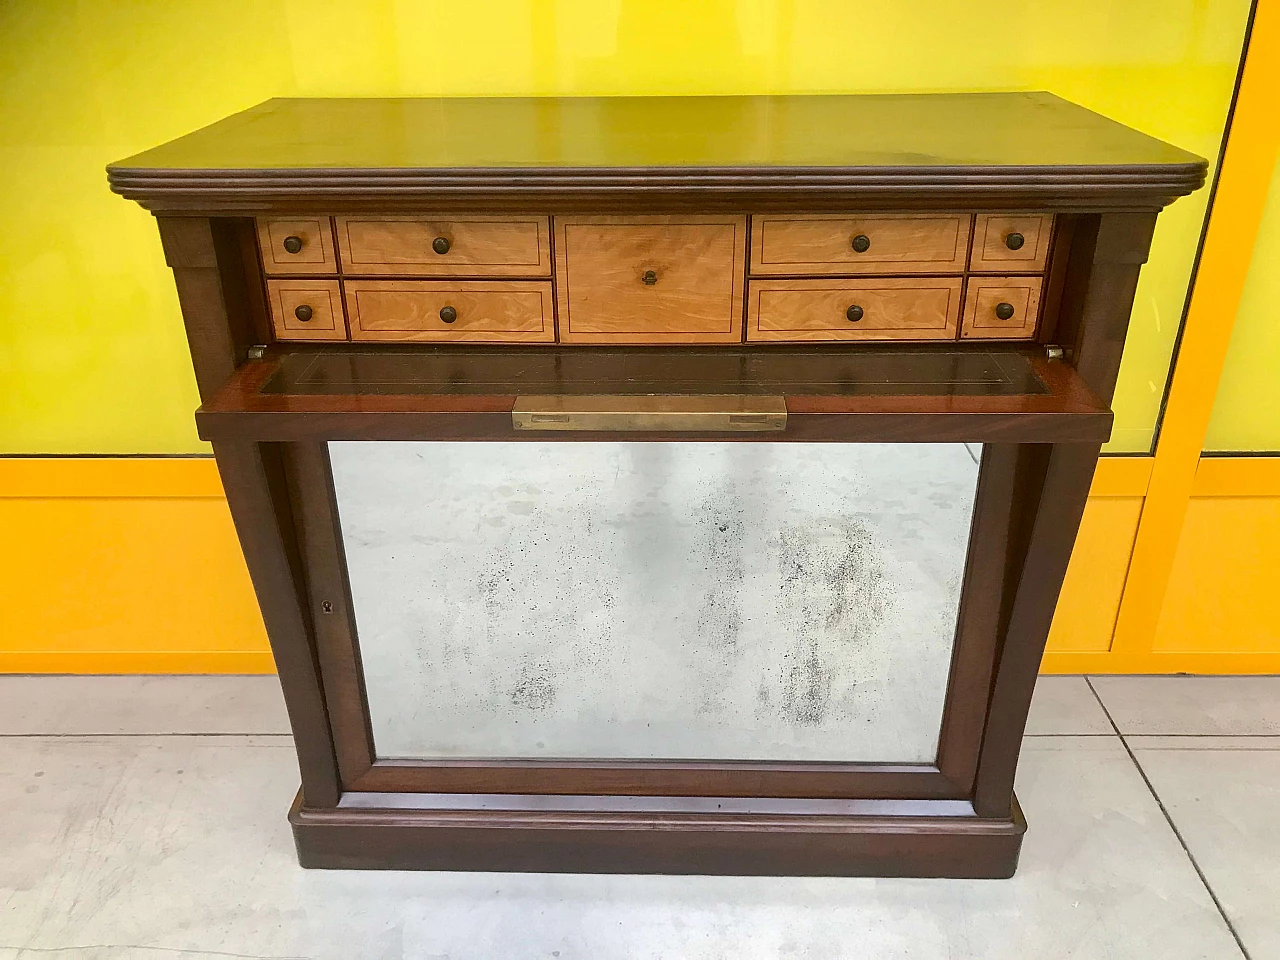 Charle X mahogany credenza console secretaire with mirror, drawers and ink stand, 19th century 1165230